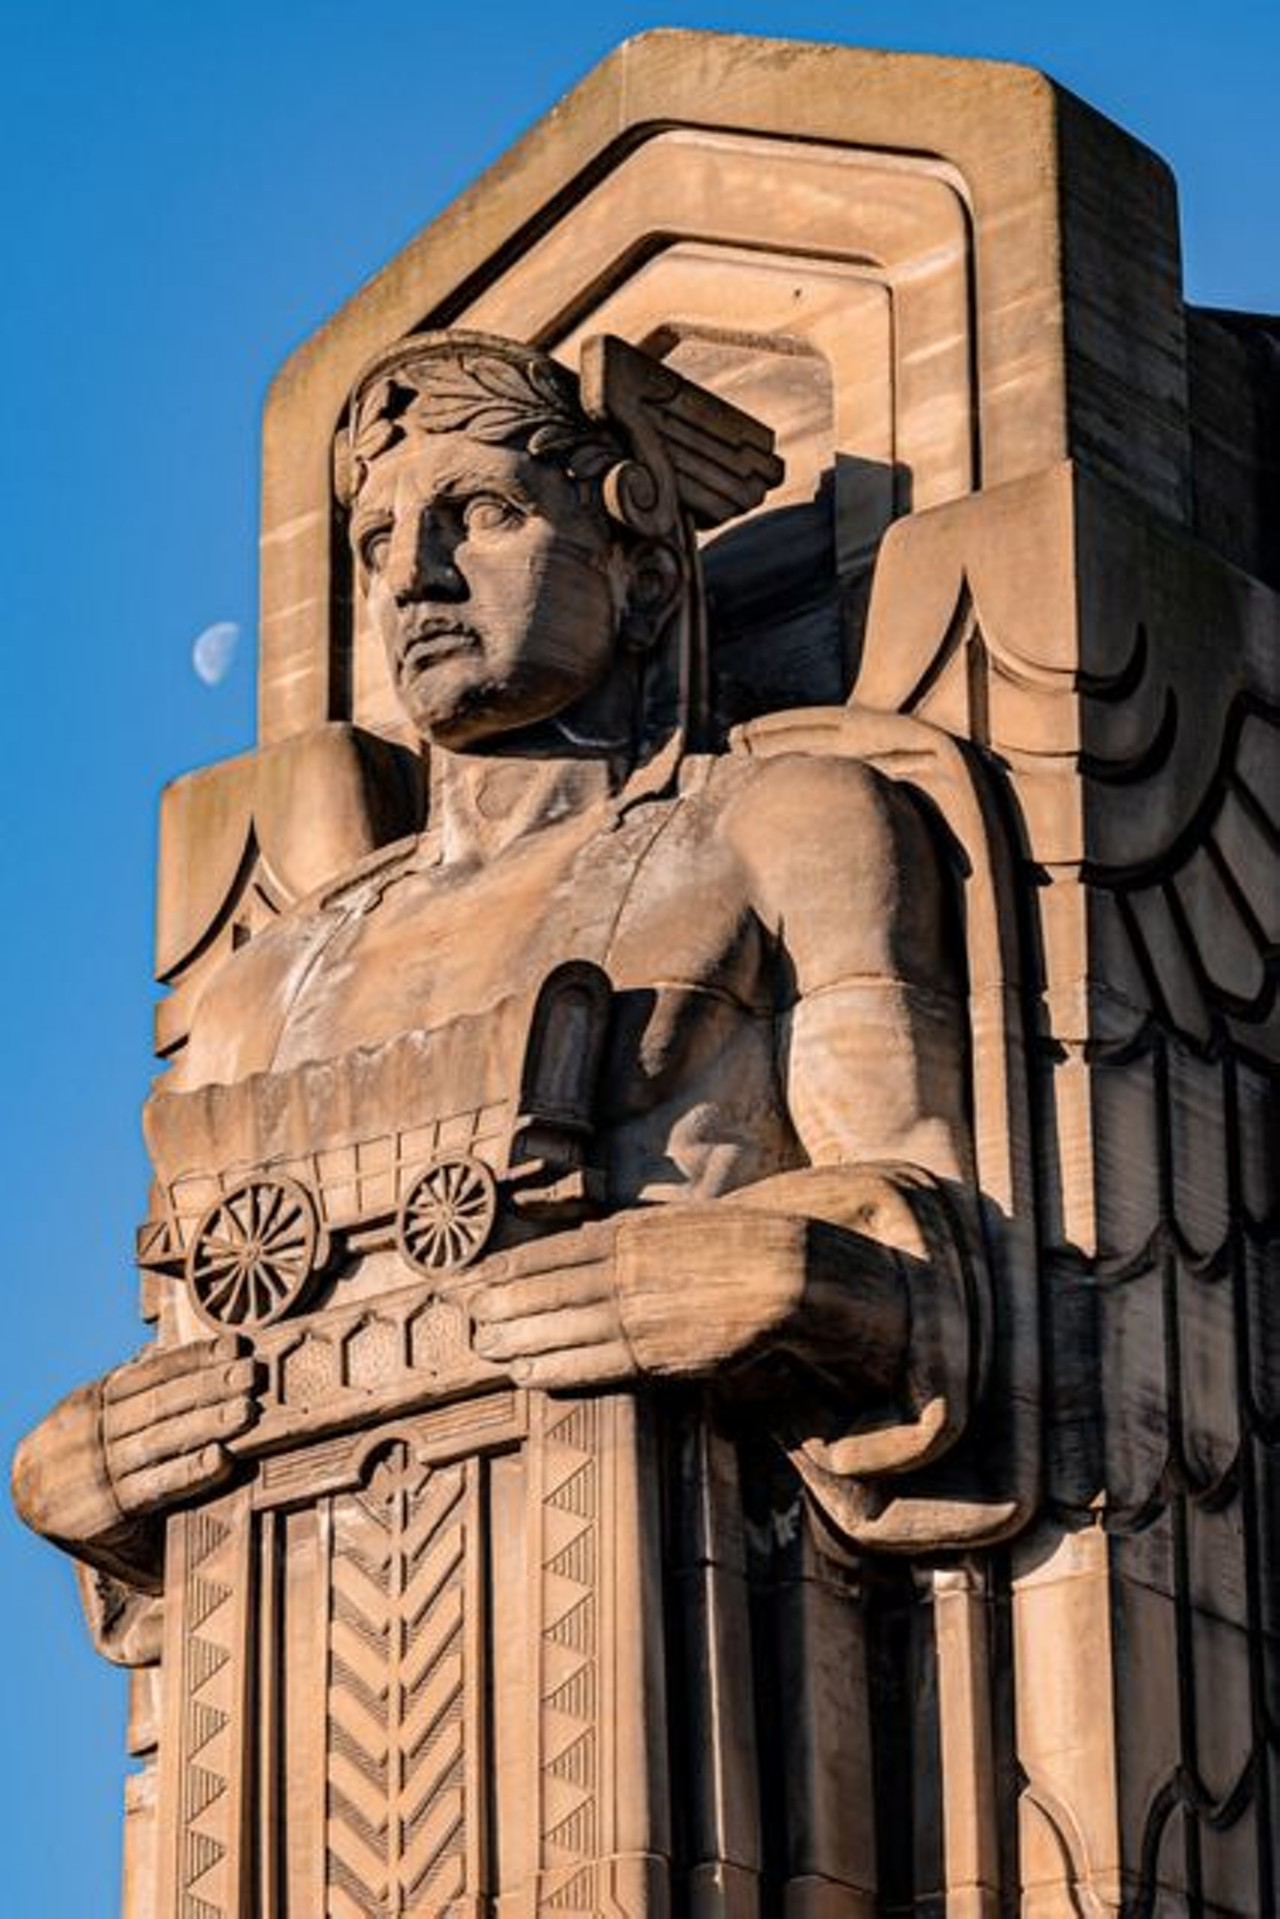 Art Deco Guardians of Transportation statue in Cleveland on the